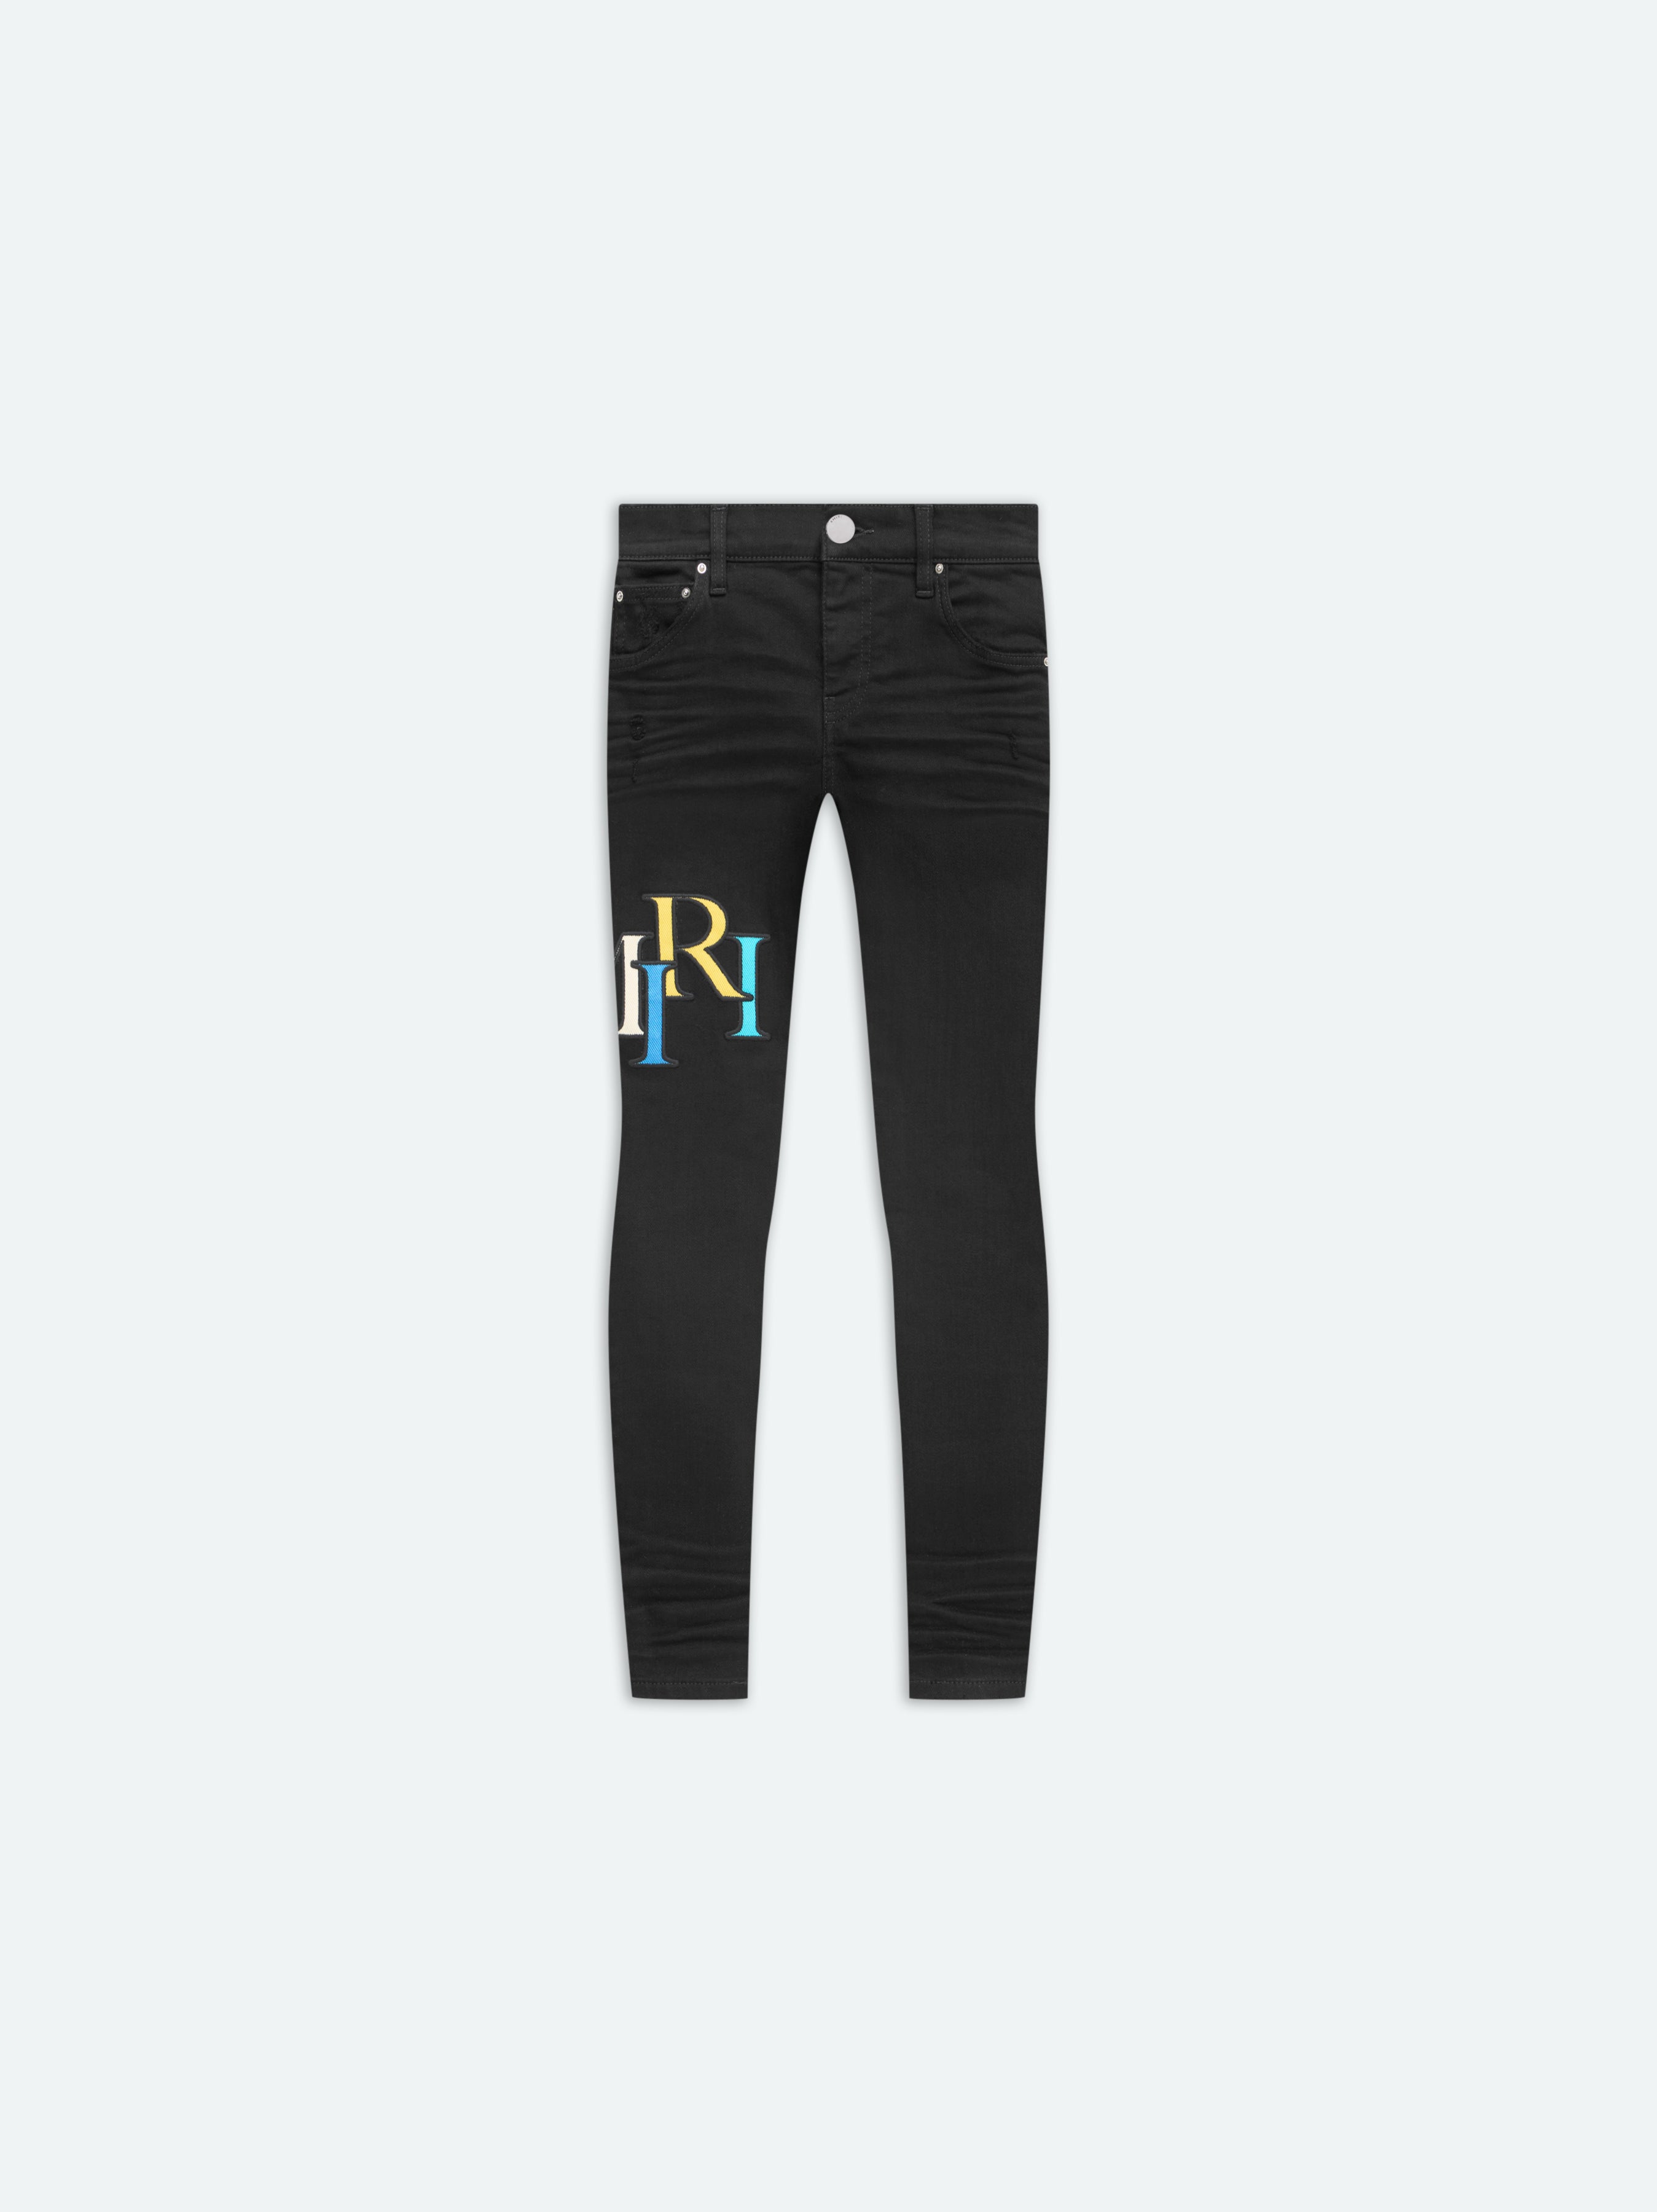 Product KIDS - AMIRI STAGGERED LOGO JEAN - OD Black featured image